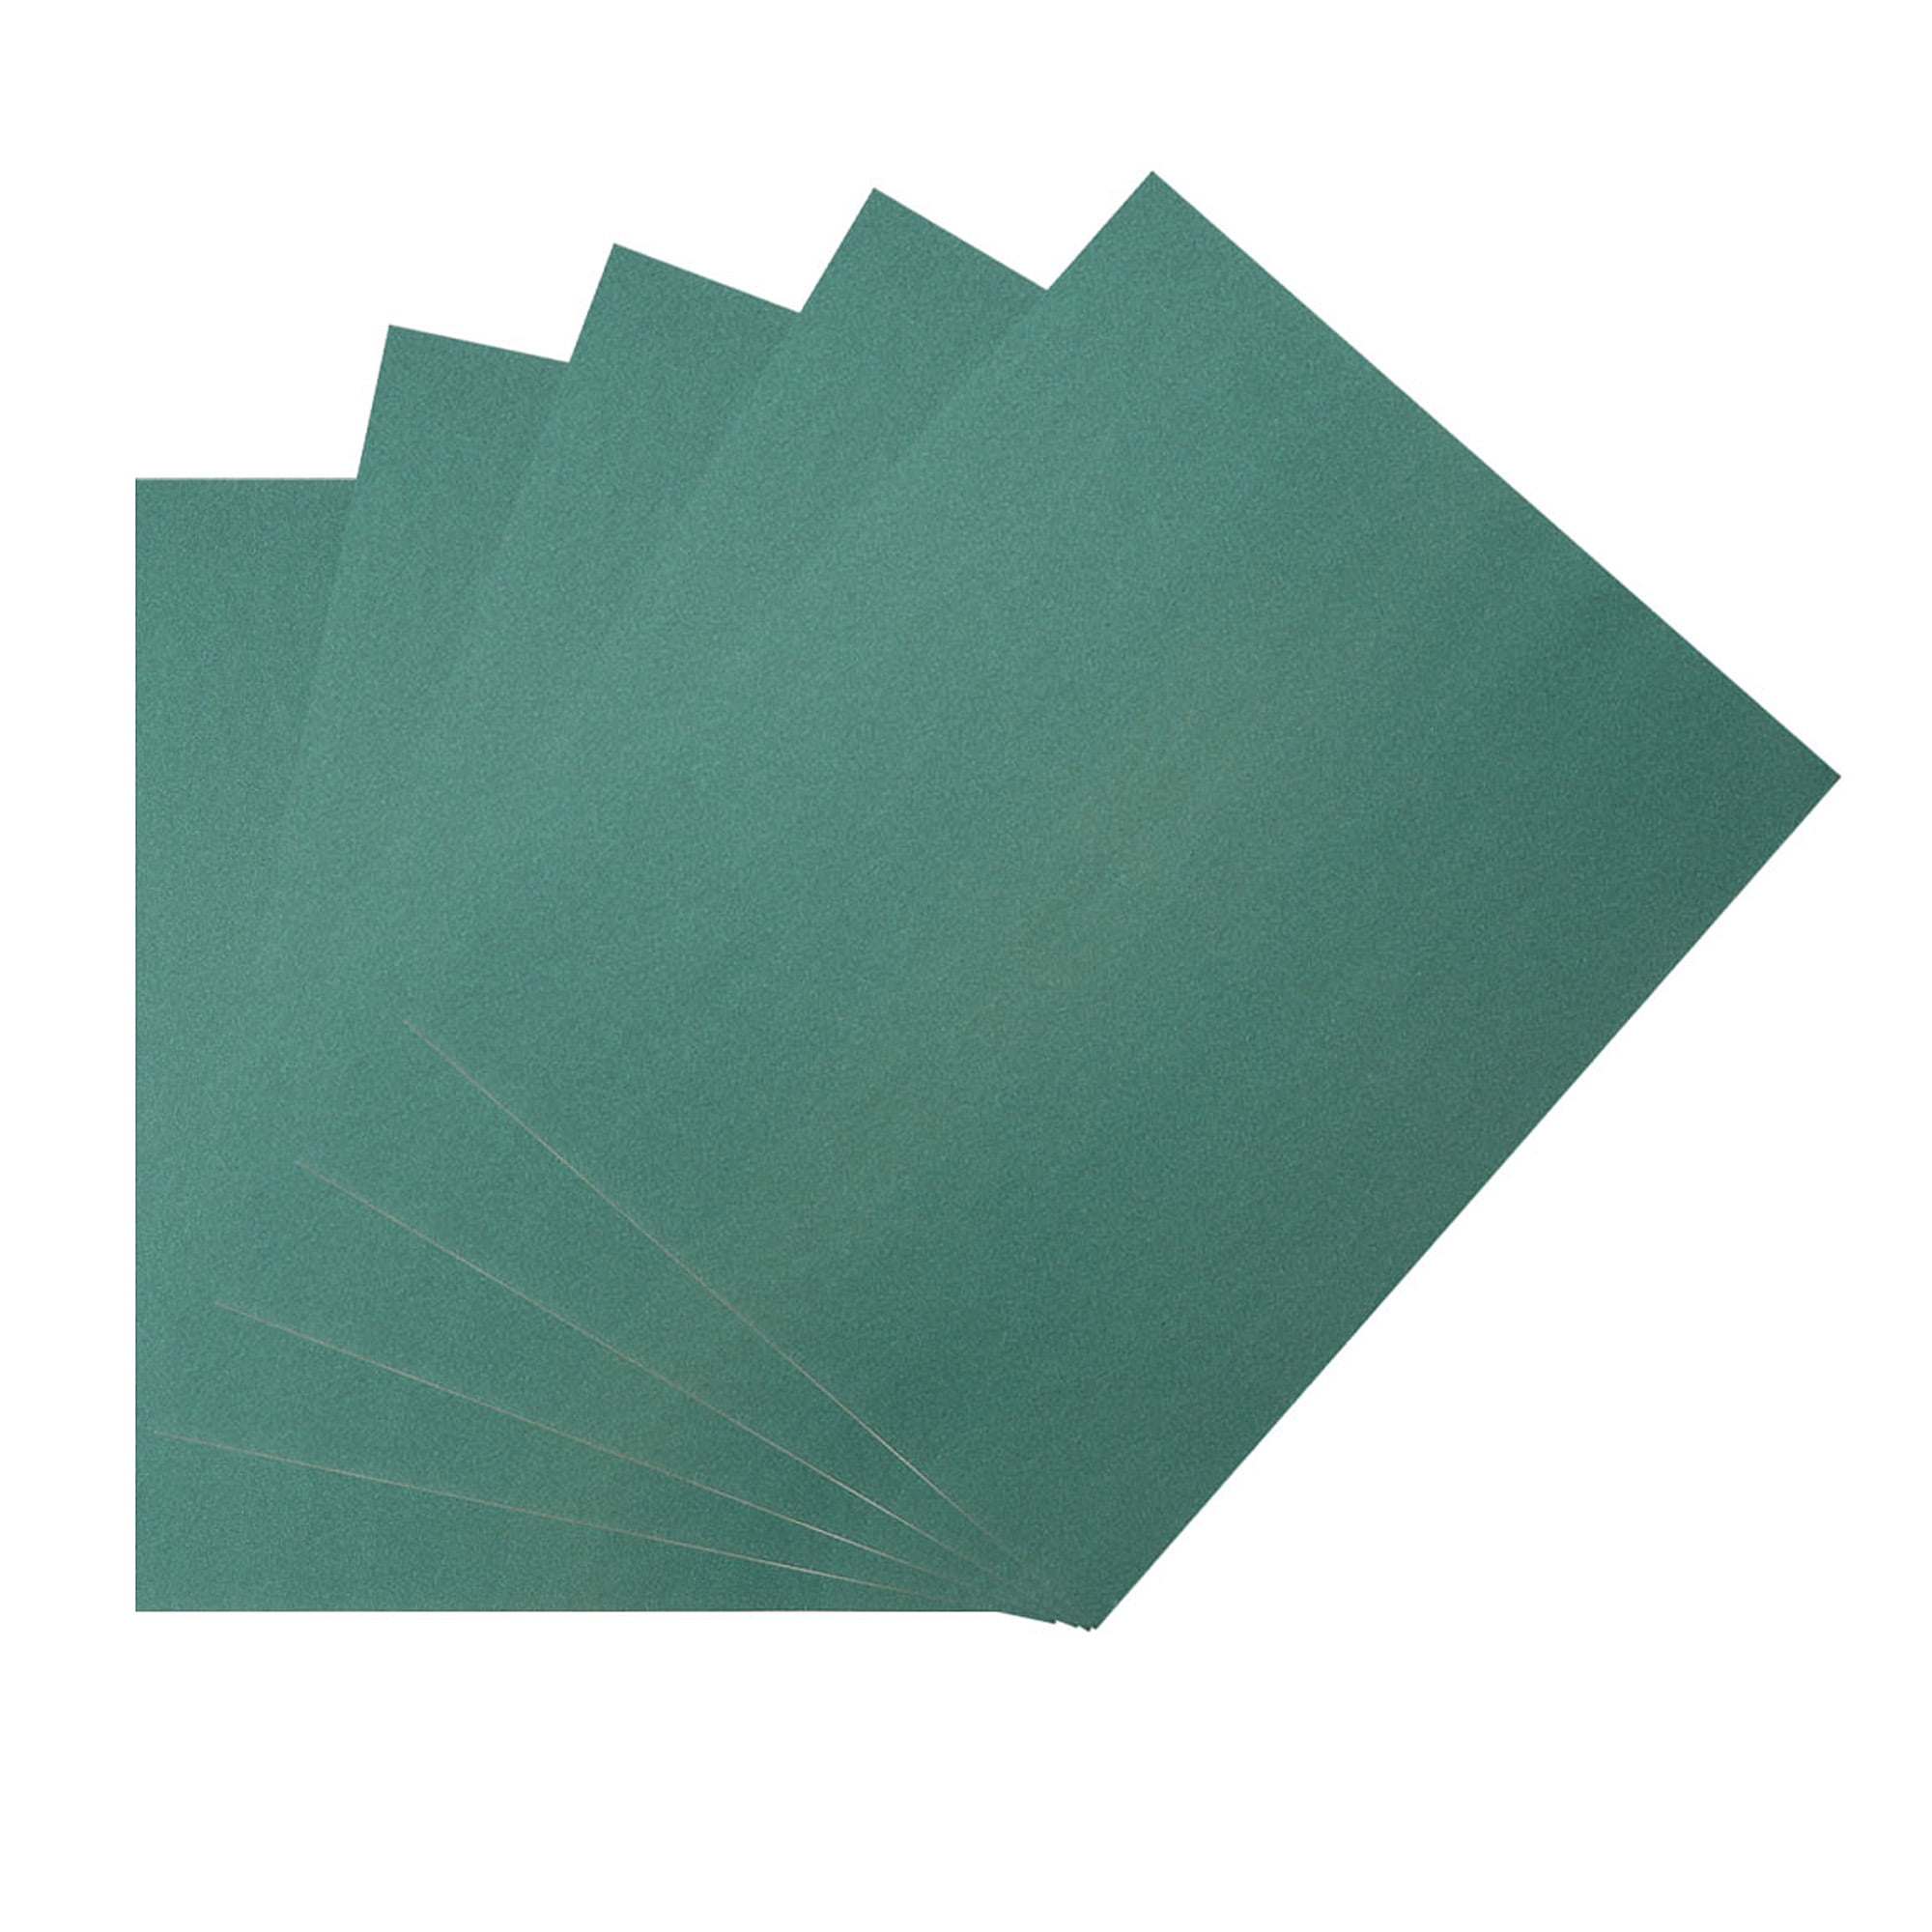 3M Wet or Dry Sheet 400 Grit 9 x 11 inch 32038 5 Sheets Per Pack 